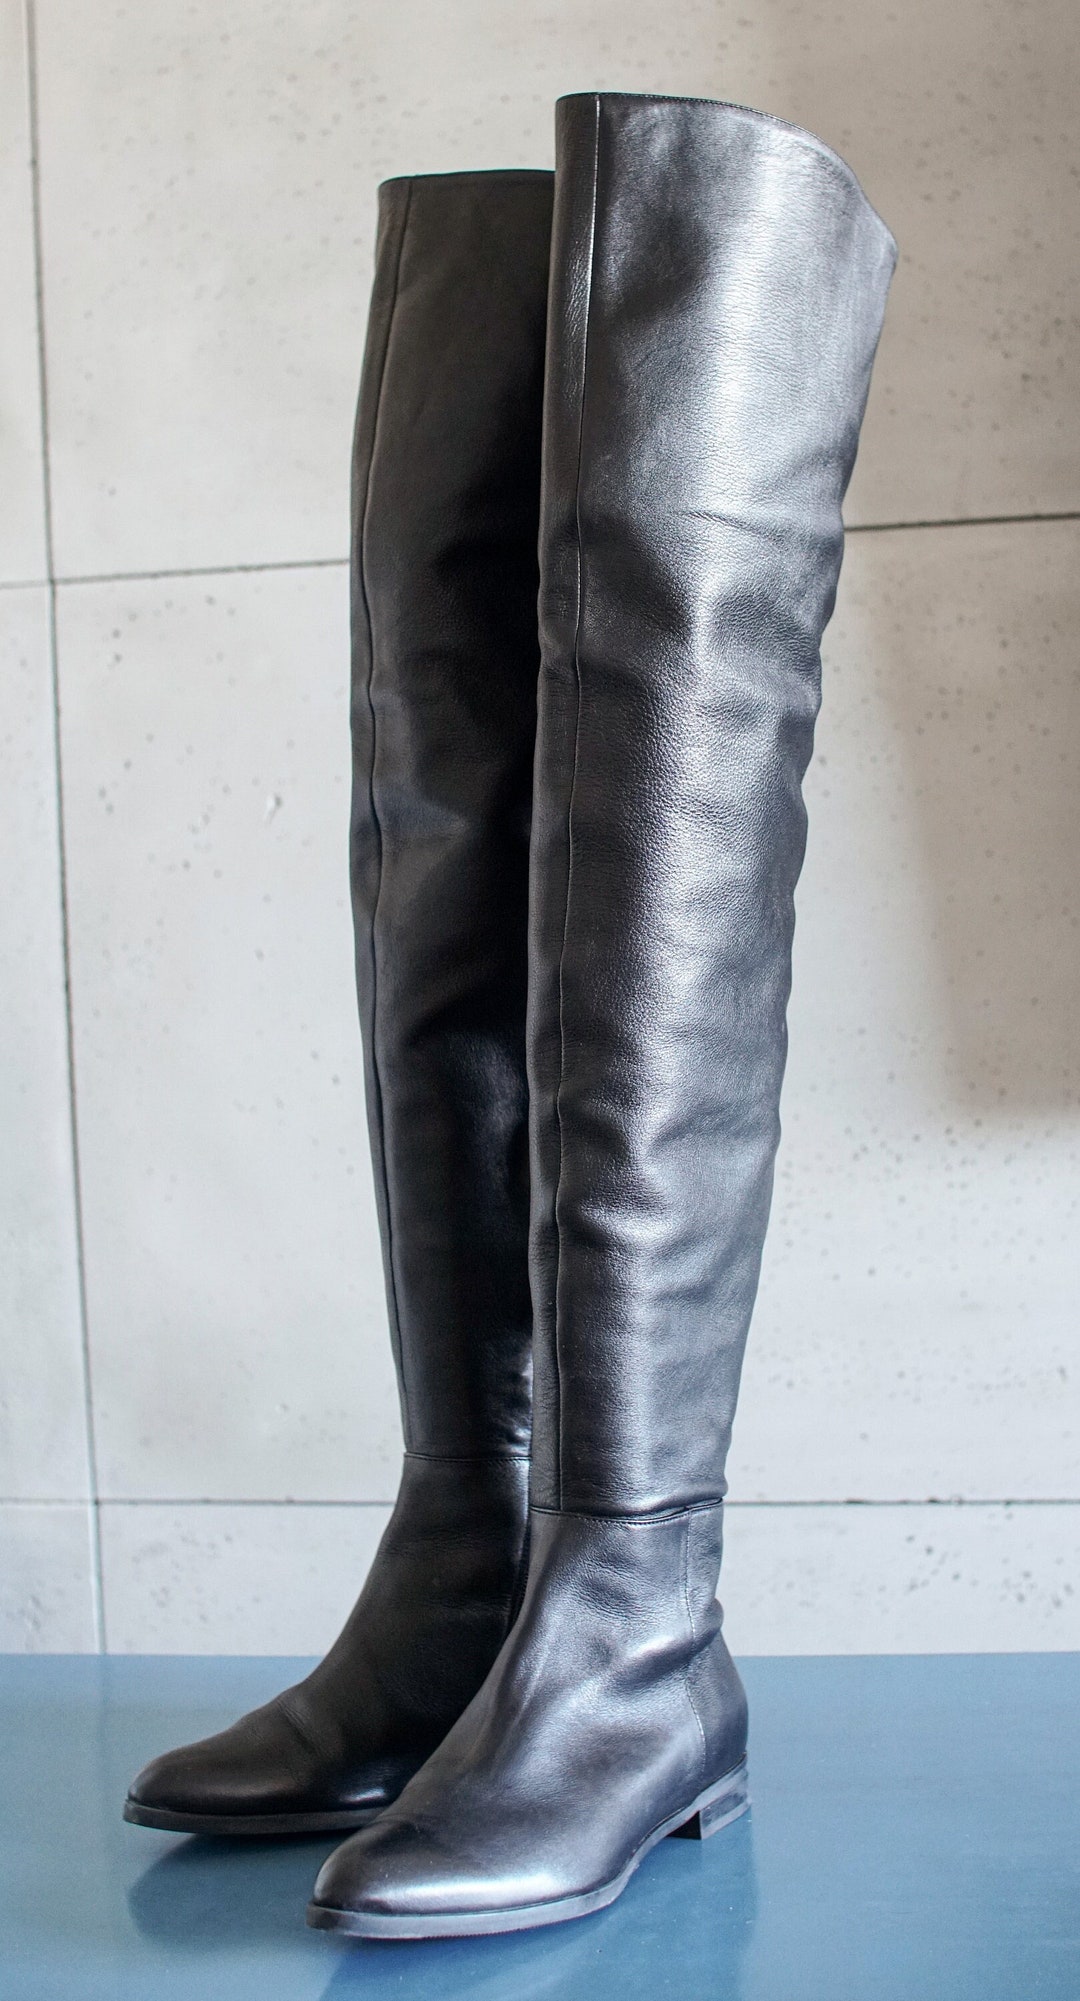 SIMPLE Thigh High Vintage Flat OVERKNEE Boots 37 Cuissardes - Etsy